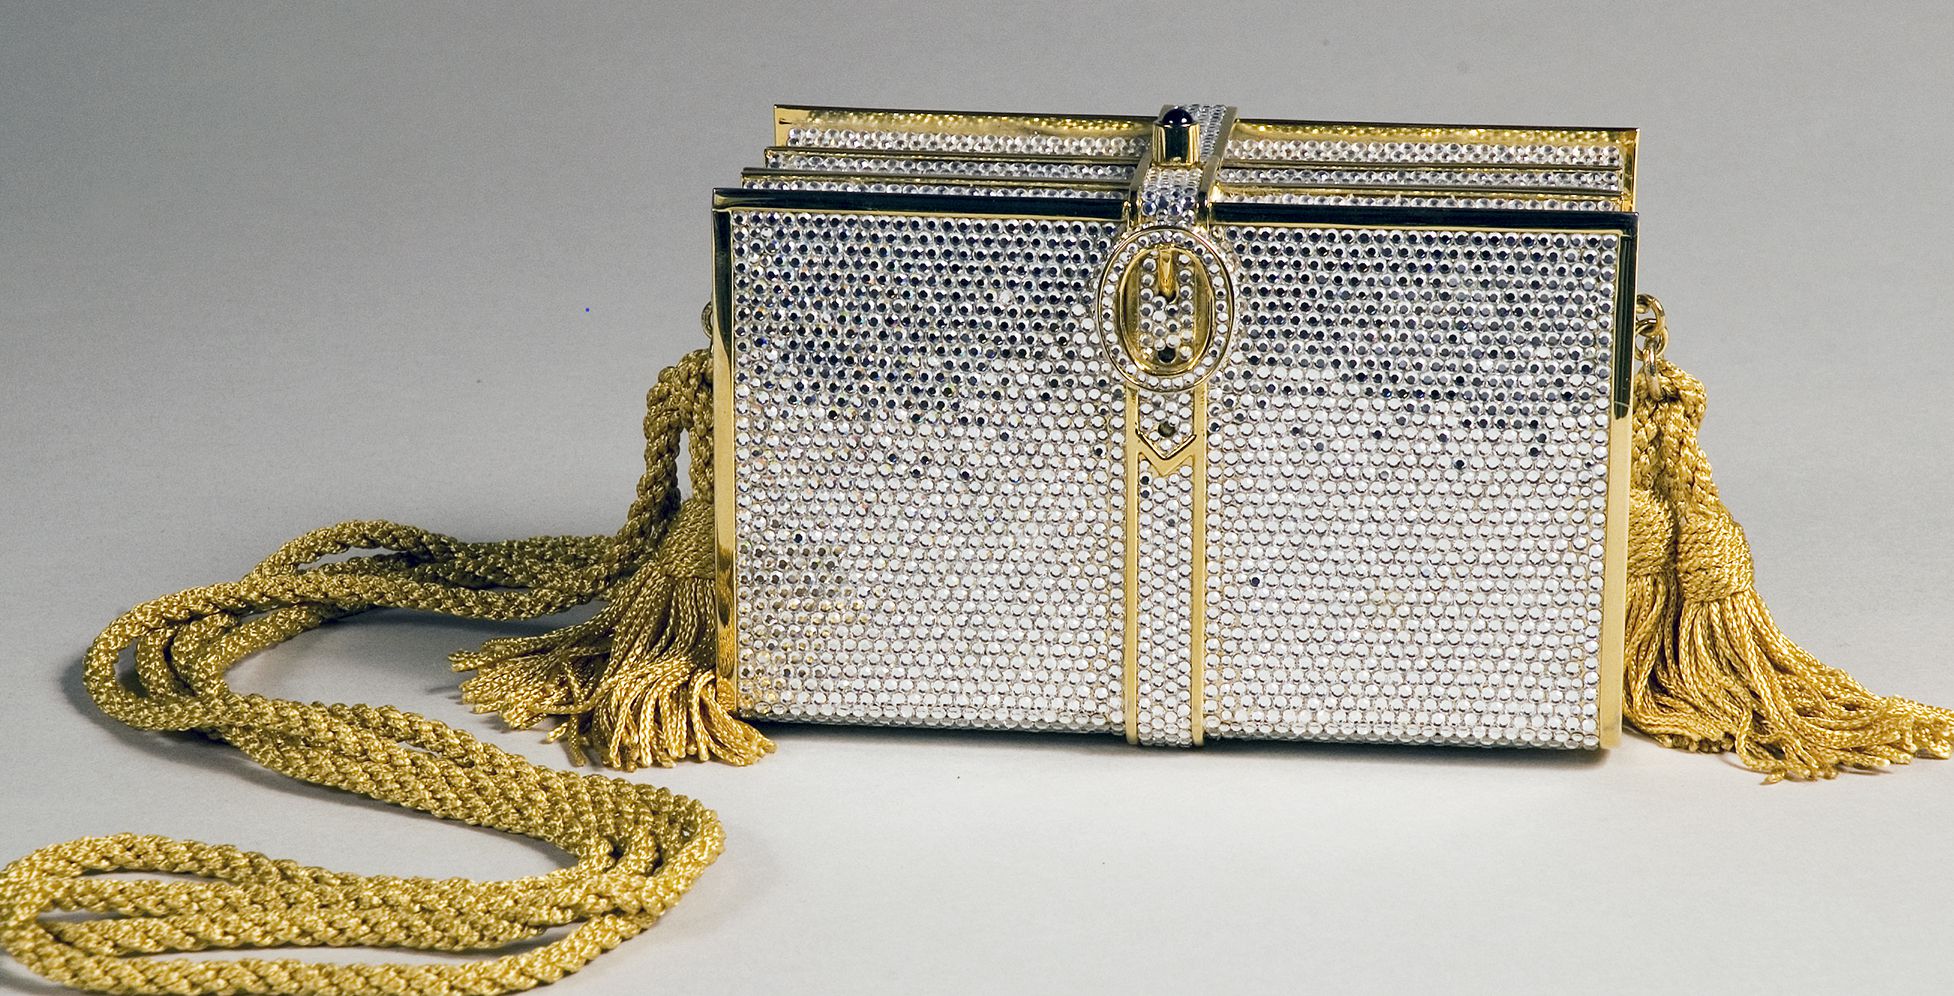 Purse with inlayed with small shiny stones